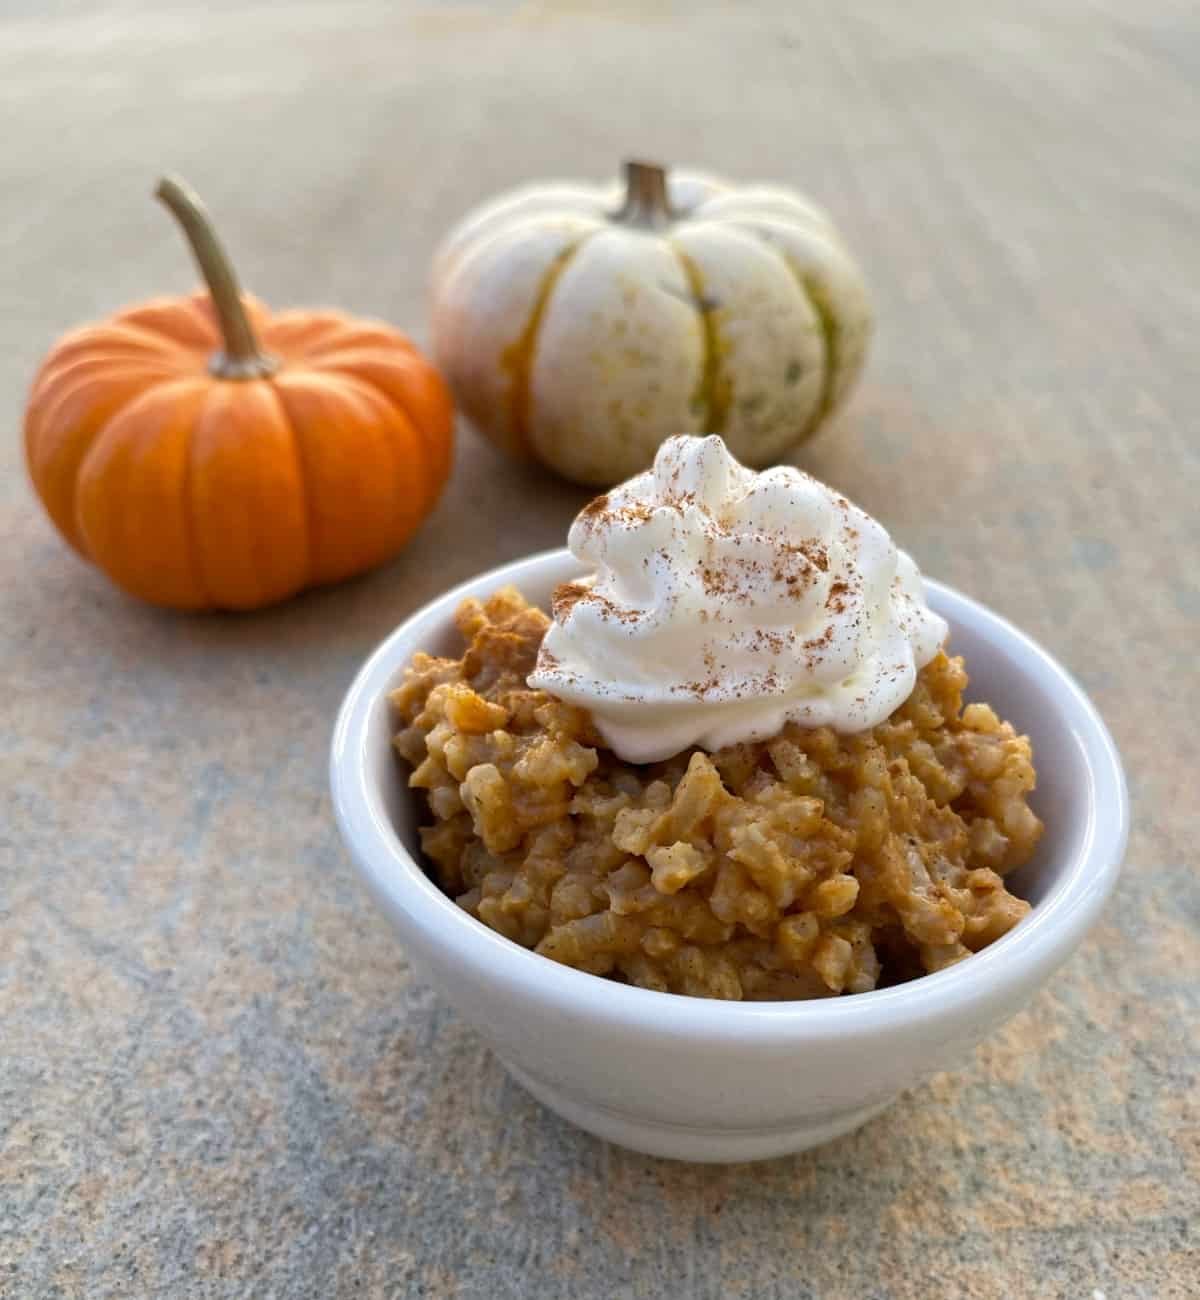 Pumpkin rice pudding topped with whipped cream in front of two small pumpkins.